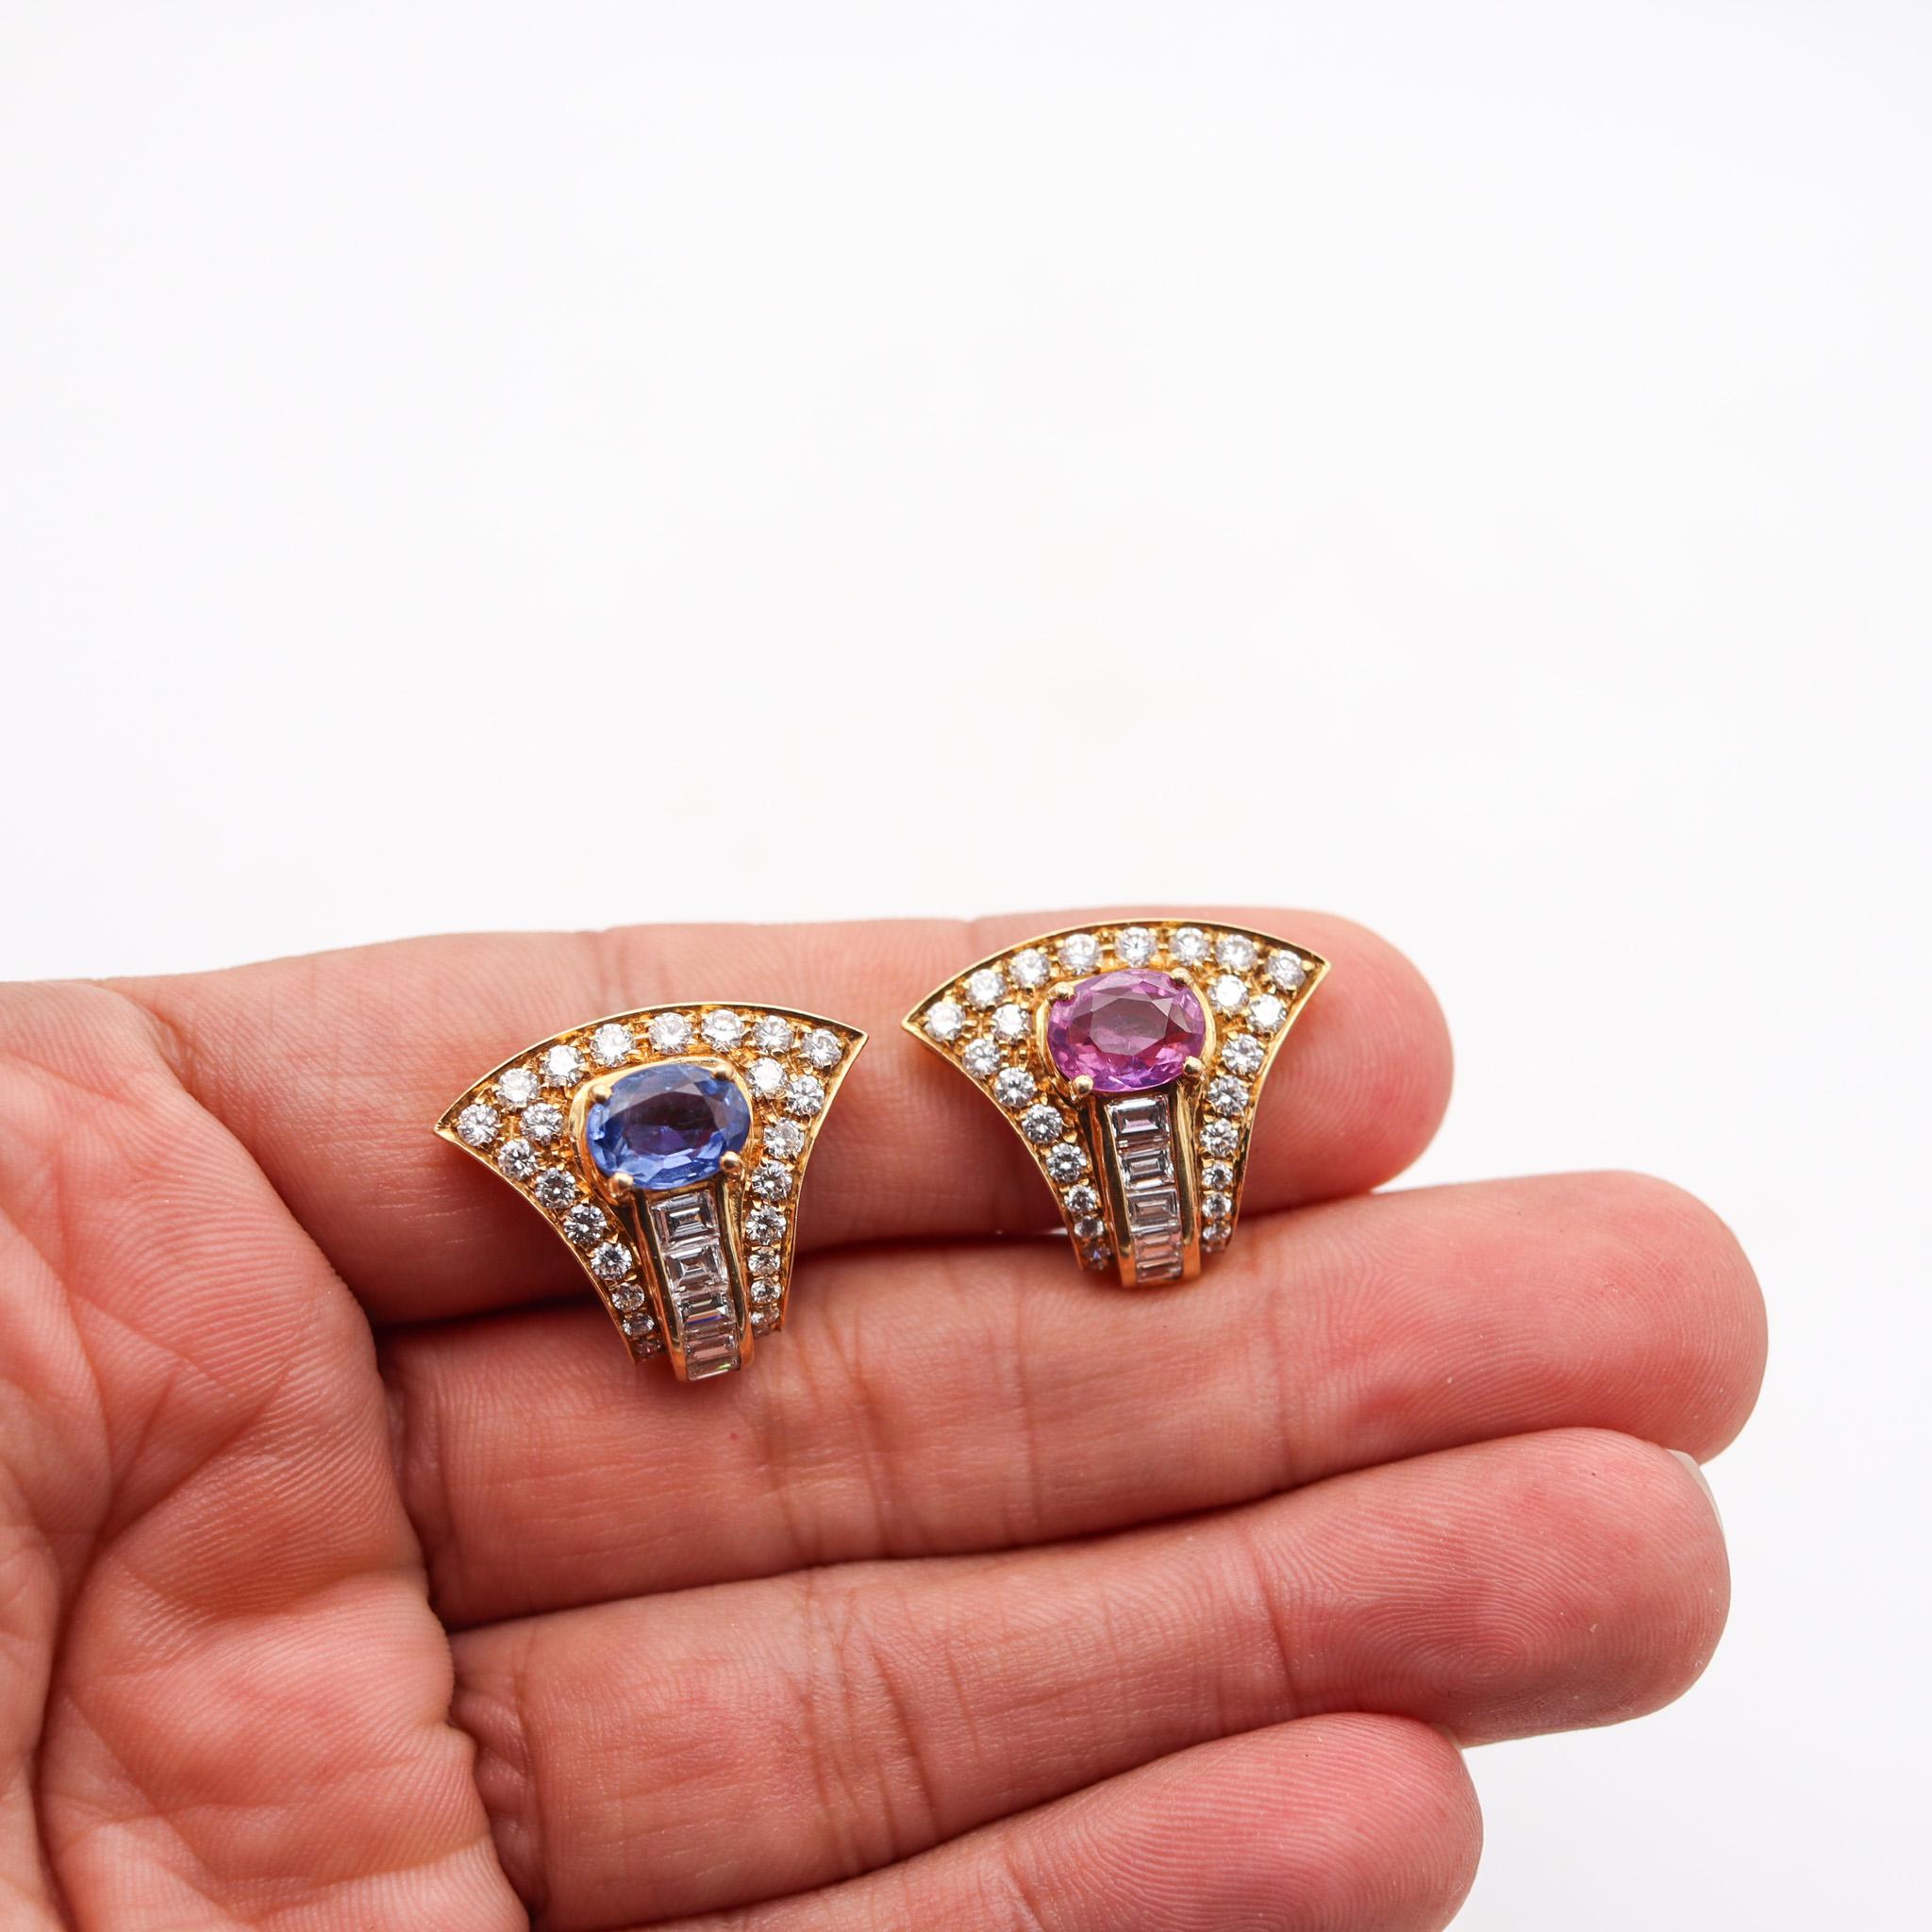 Women's Bvlgari Clip On Earrings In 18Kt Yellow Gold With 8.93 Ctw Diamonds & Sapphires